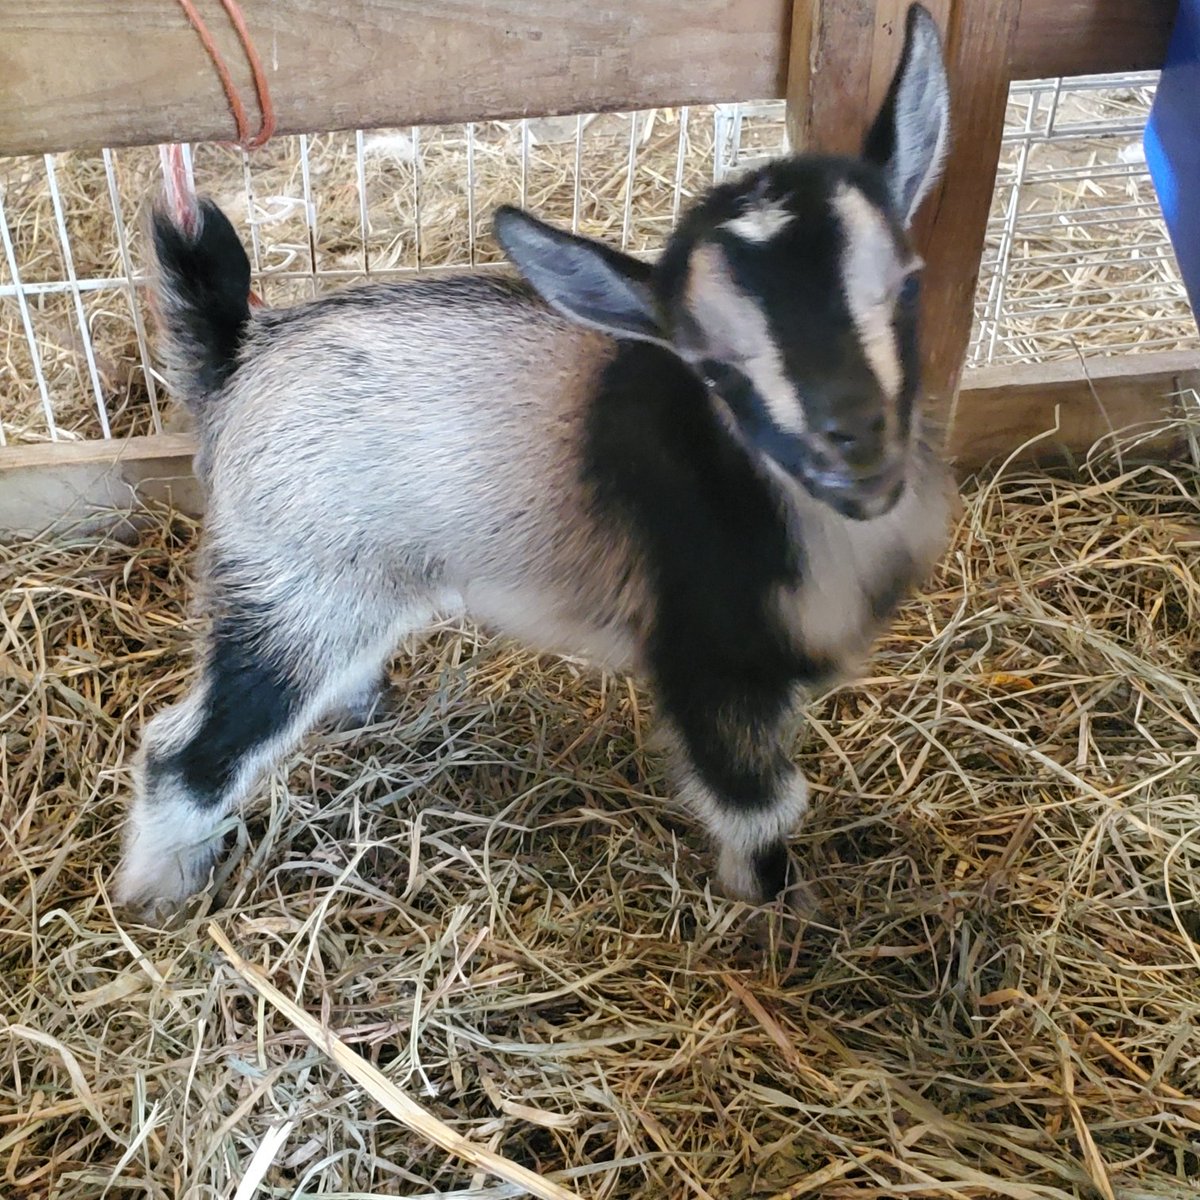 Some baby goats recently born on our farm. 
#goats #babygoats